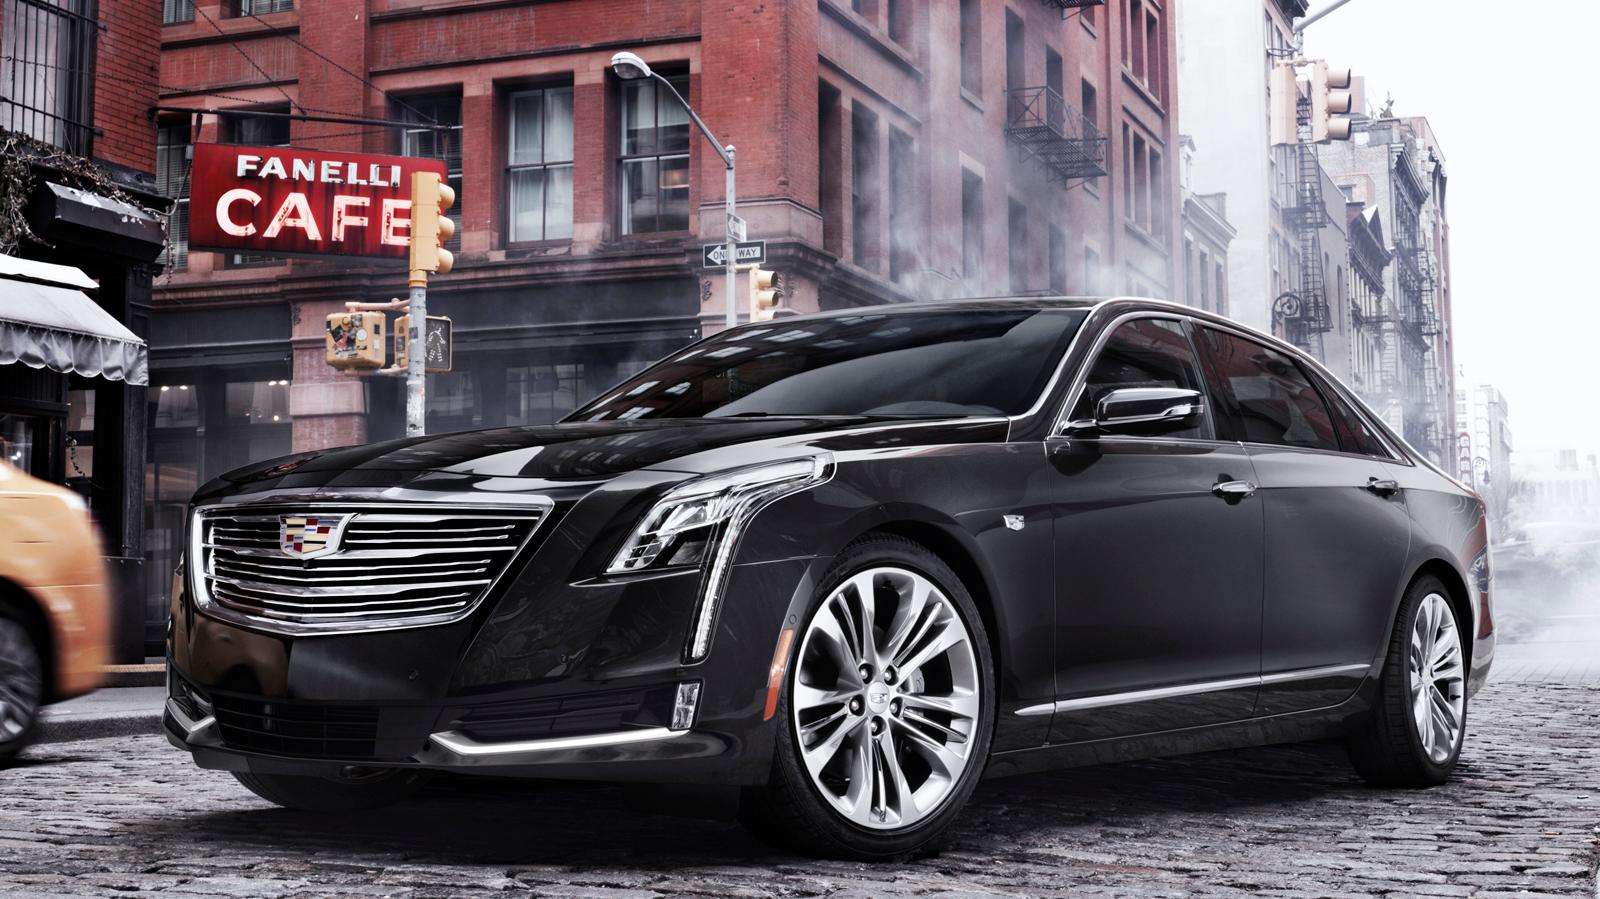 Contact Durand Cadillac to Service Your 2017 Cadillac CT6